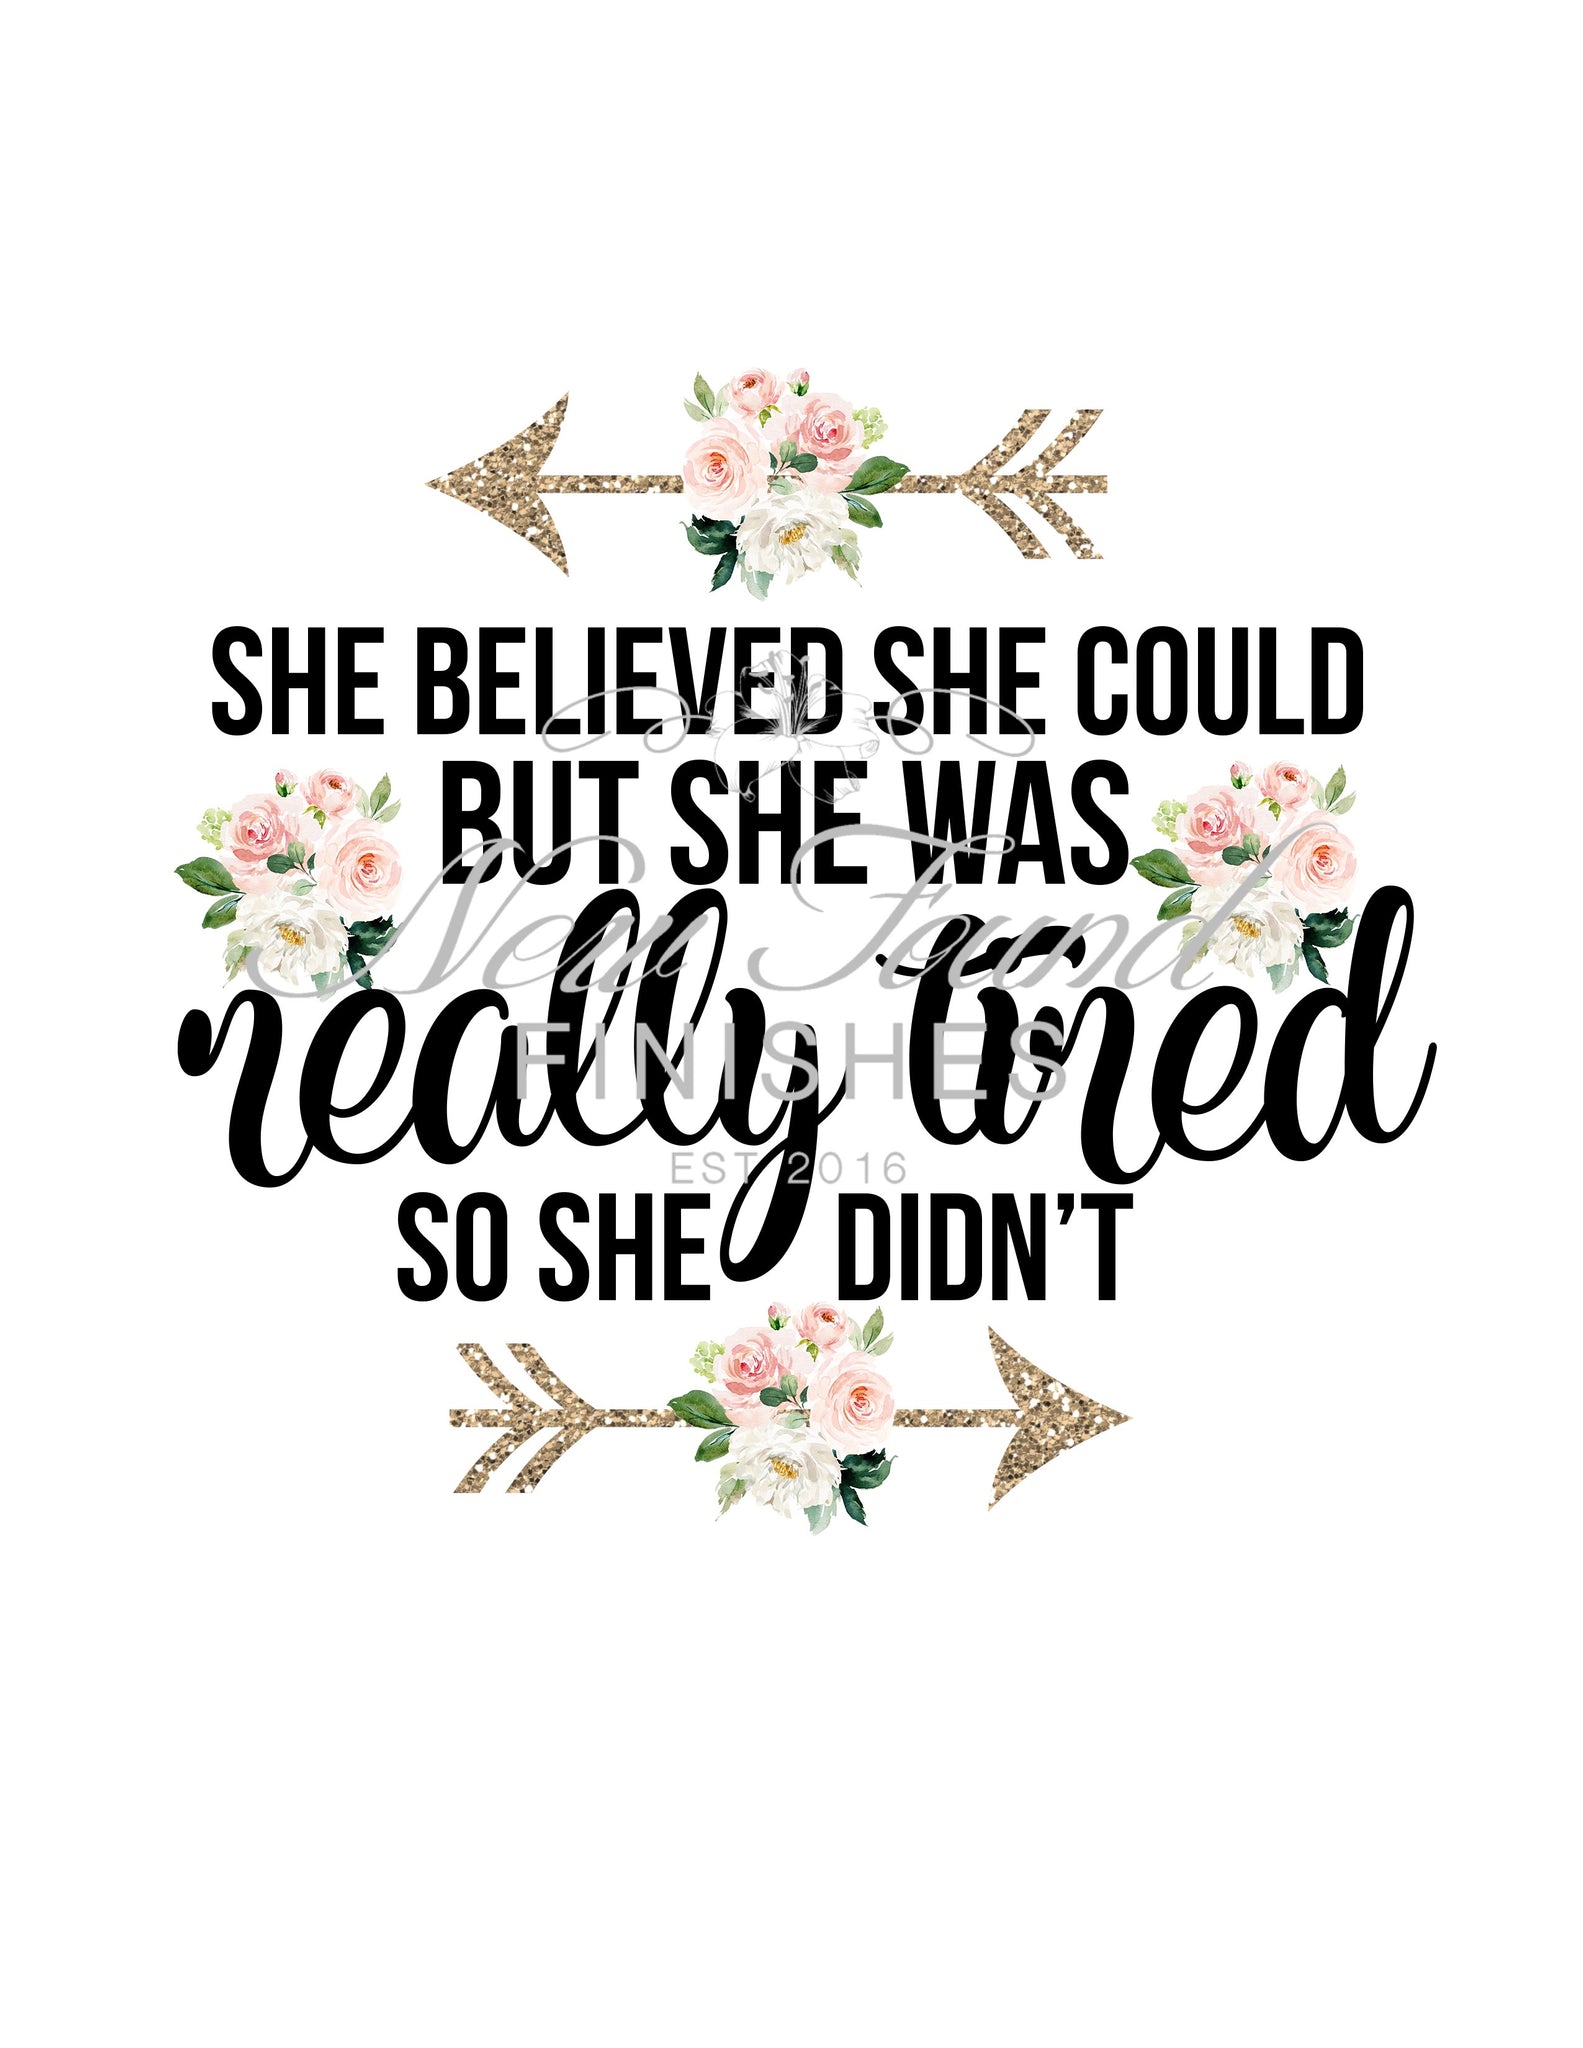 She believed she could but she was really tired